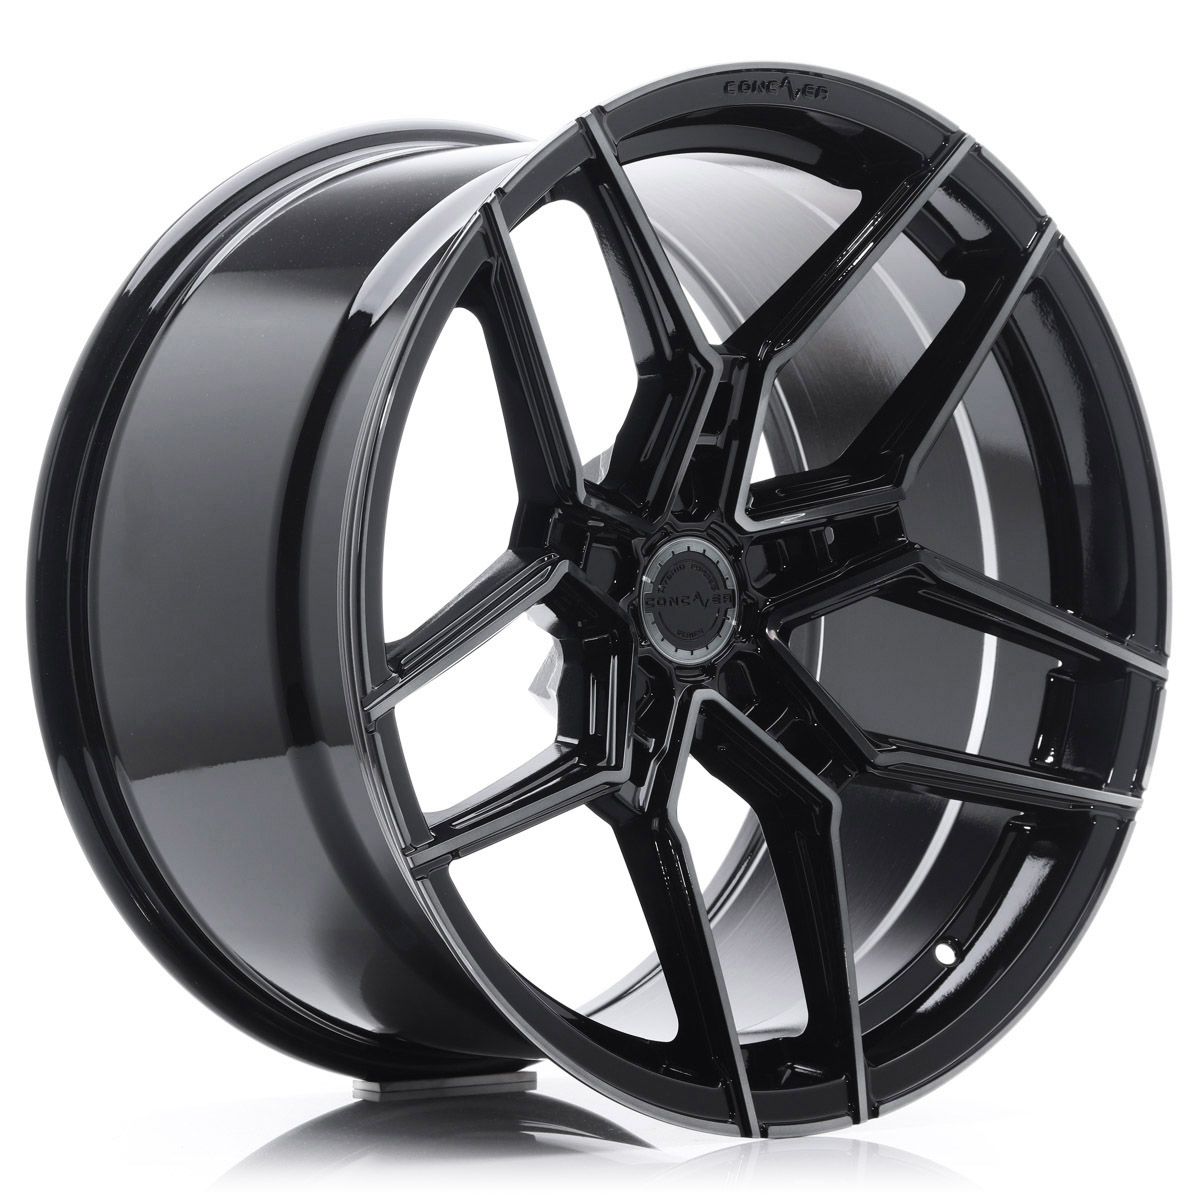 Concaver CVR5 21" Staggered - Double Tinted Black - Model S